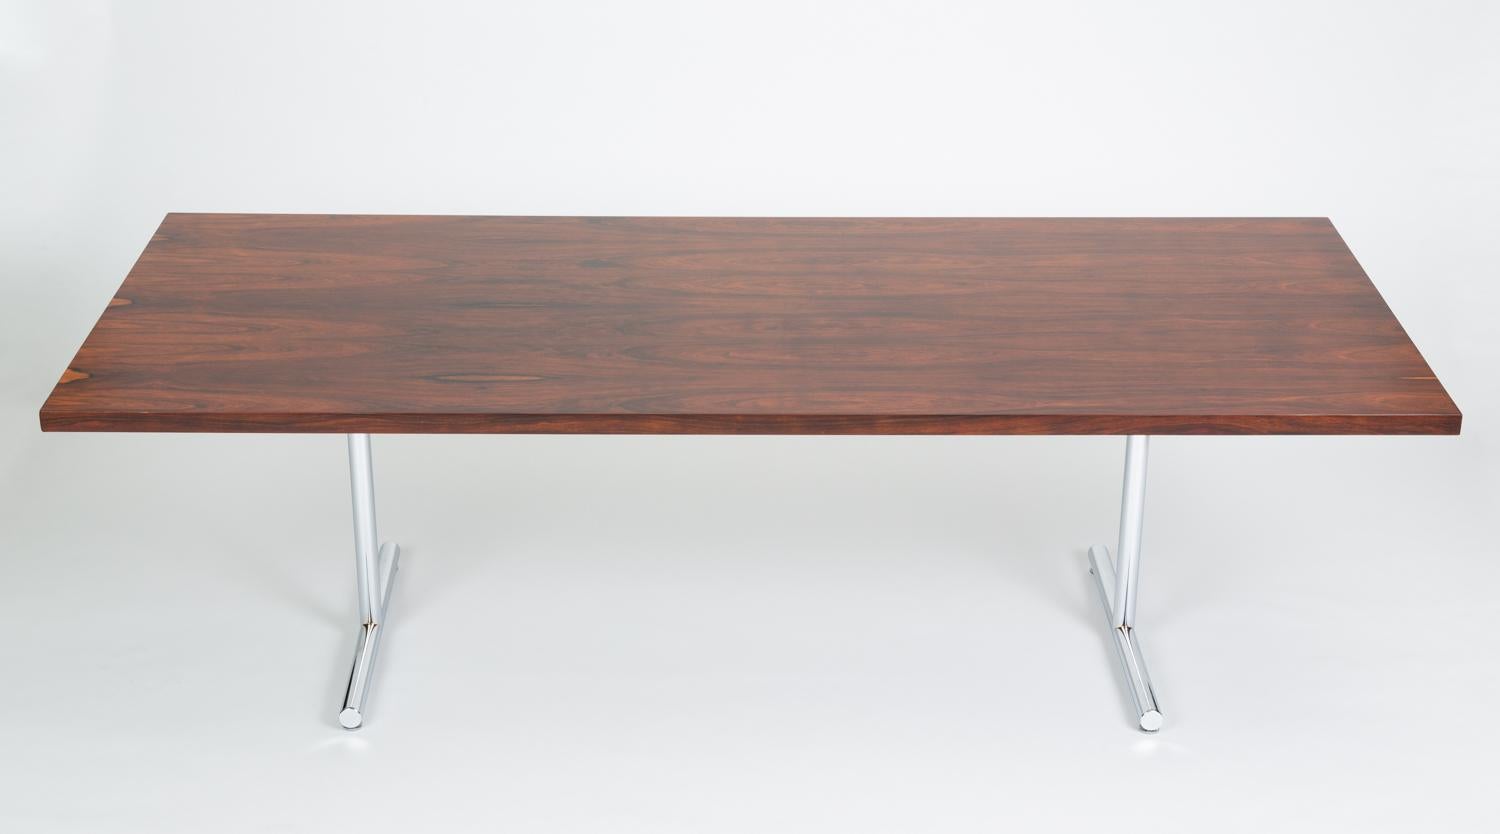 A long rosewood table with a utilitarian minimalism designed by Hans Eichenberger was originally marketed as a “desk-dining table” but could also be used as a conference table. The wooden slab-style table sits atop a trestle base in thick, tubular